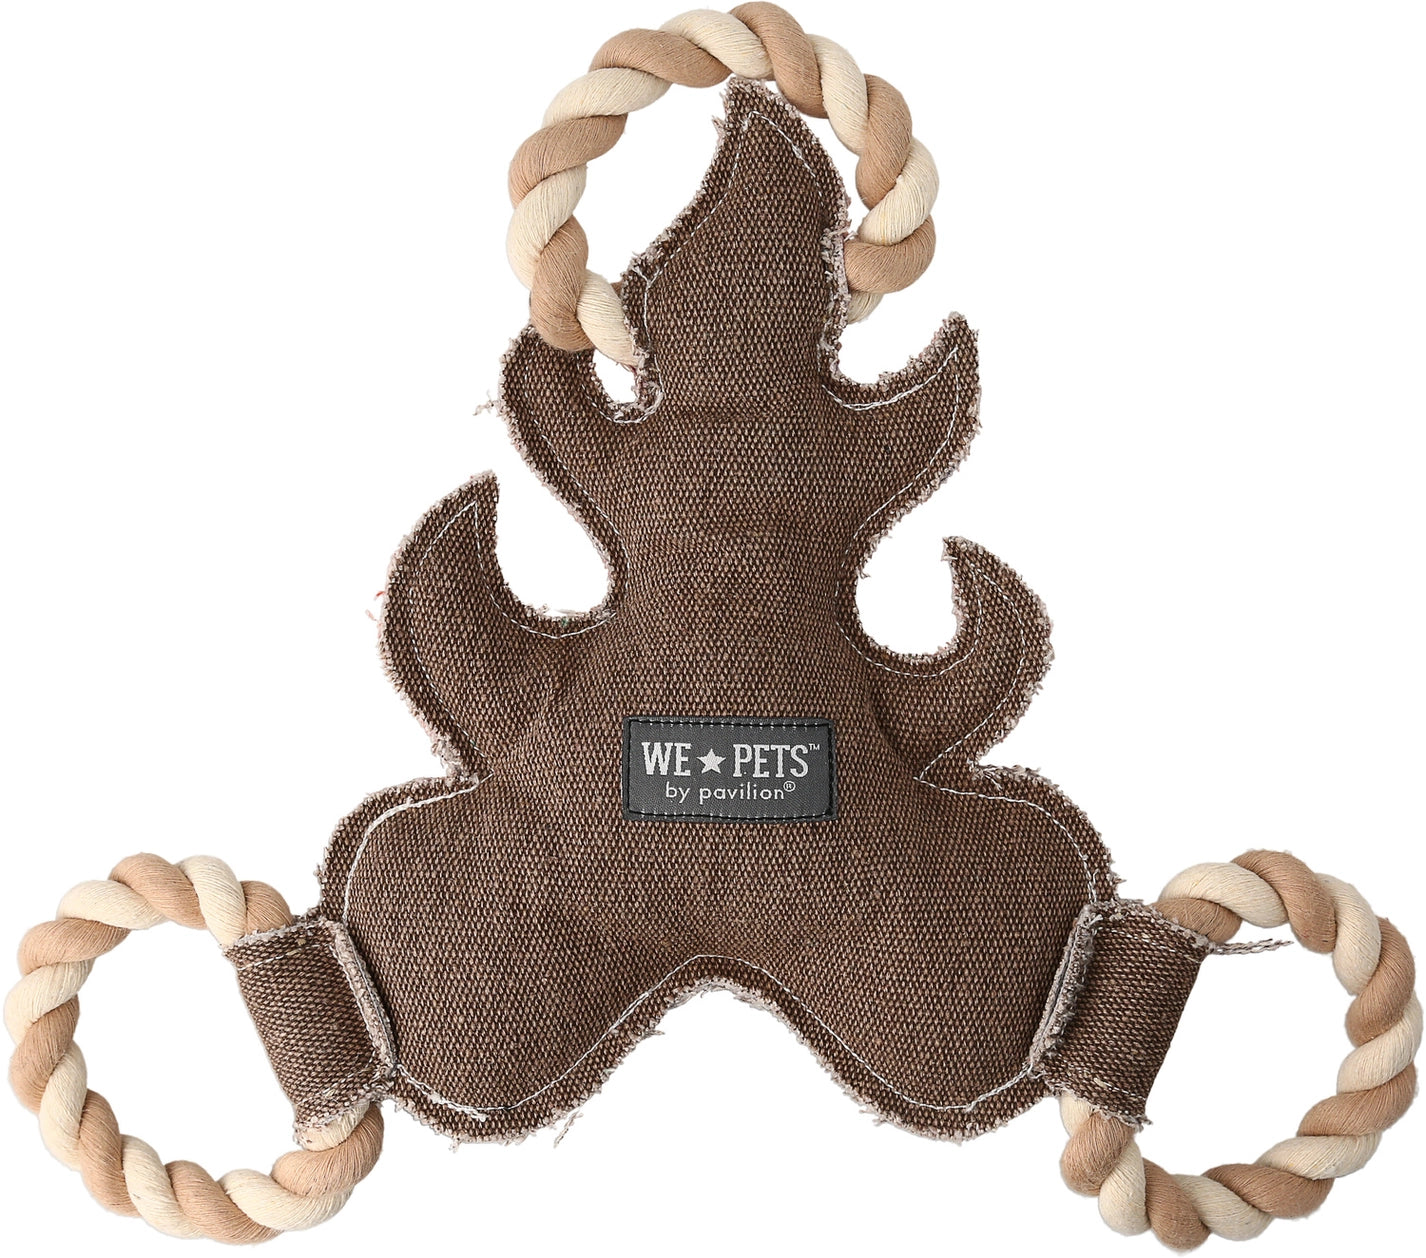 Camping Dog-Canvas & Rope Dog Toy 12"